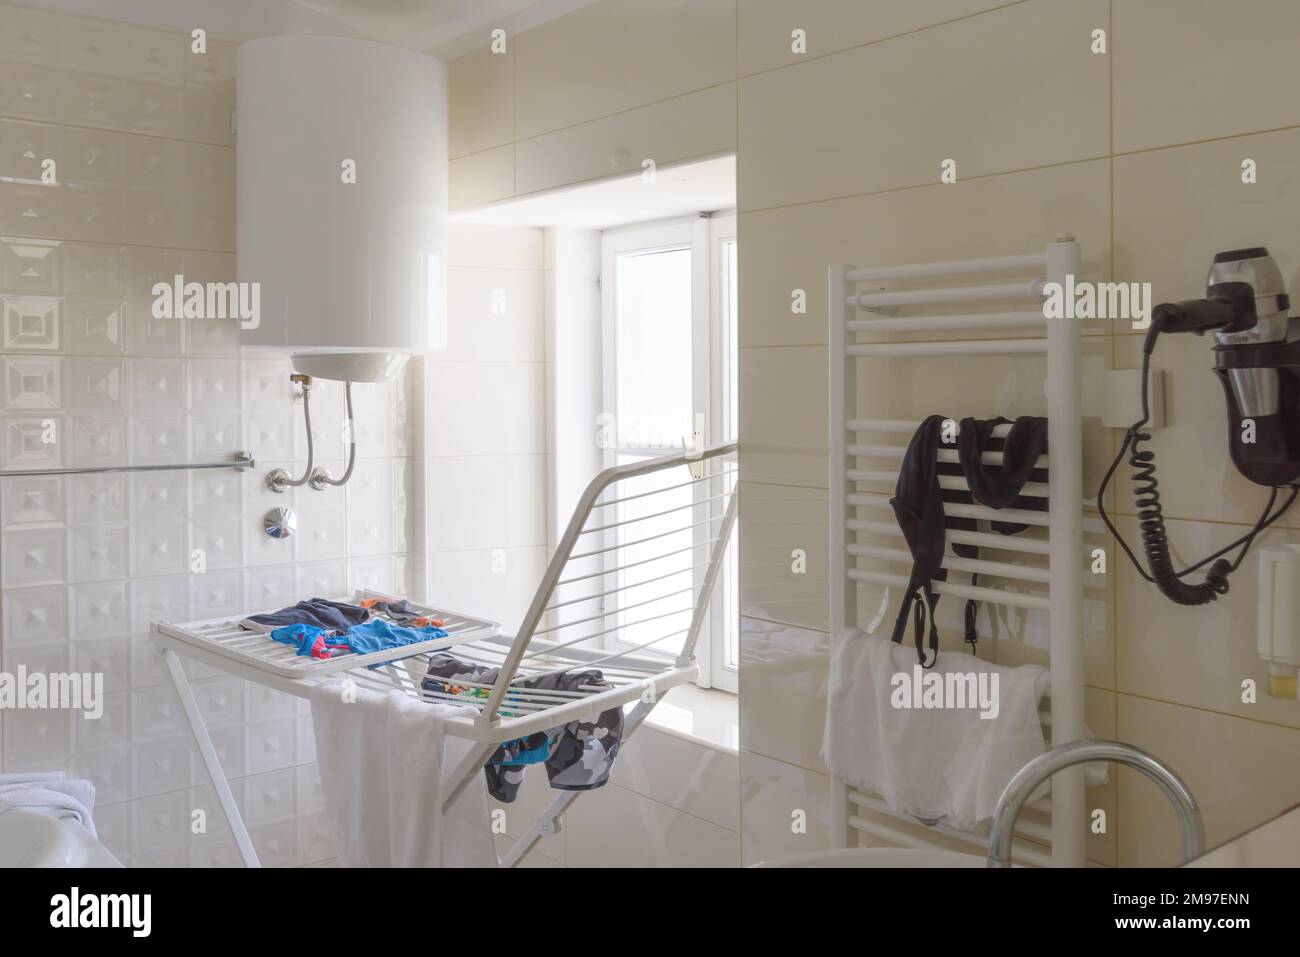 Cluttered bathroom with clothes on drying rack, selective focus Stock Photo